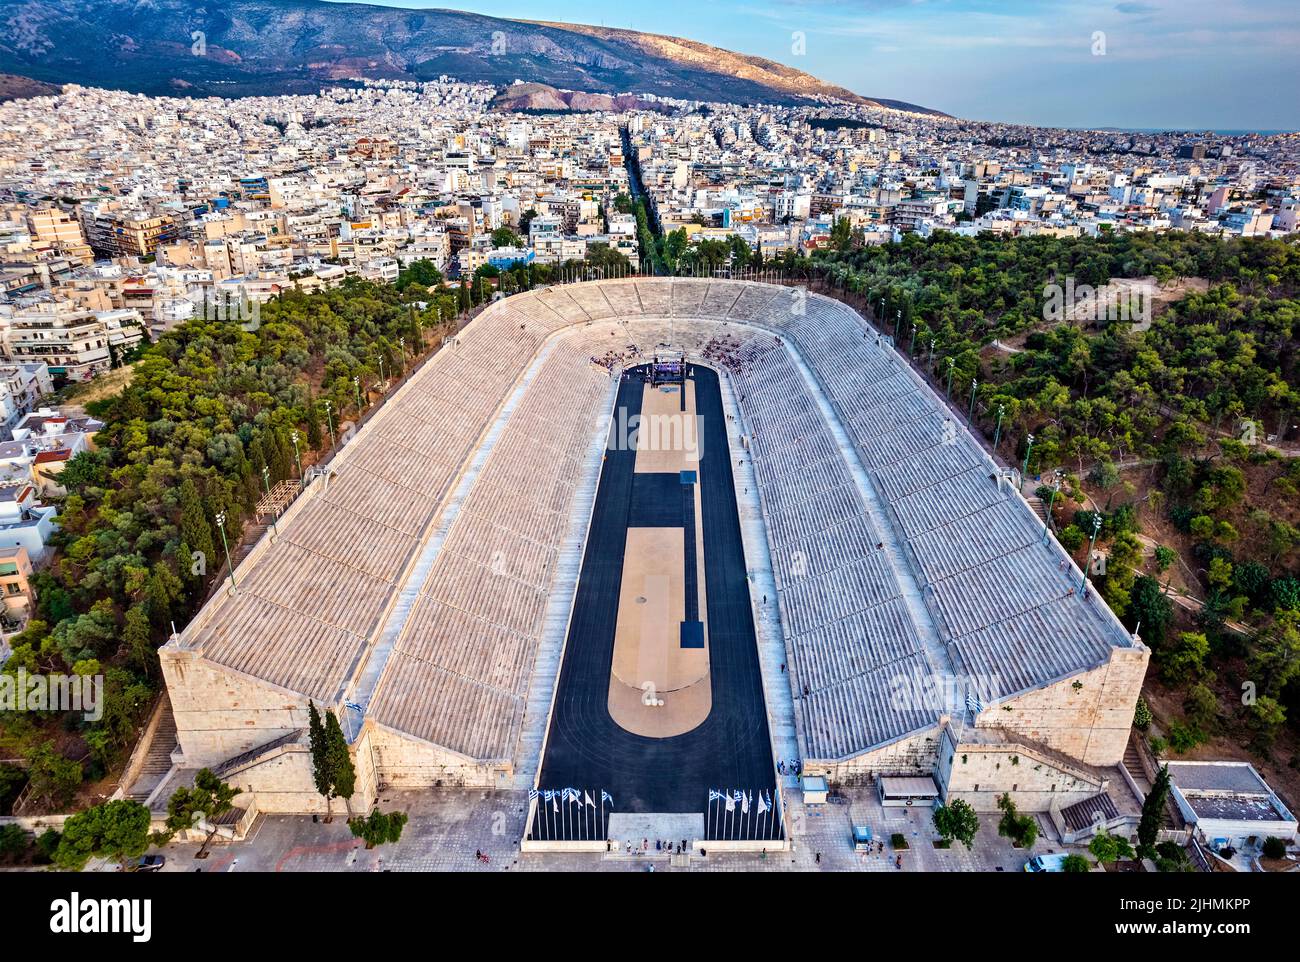 Aerial View Of The Panathinaiko Or Panathenaic Stadium Where The First Olympic Games Of Modern